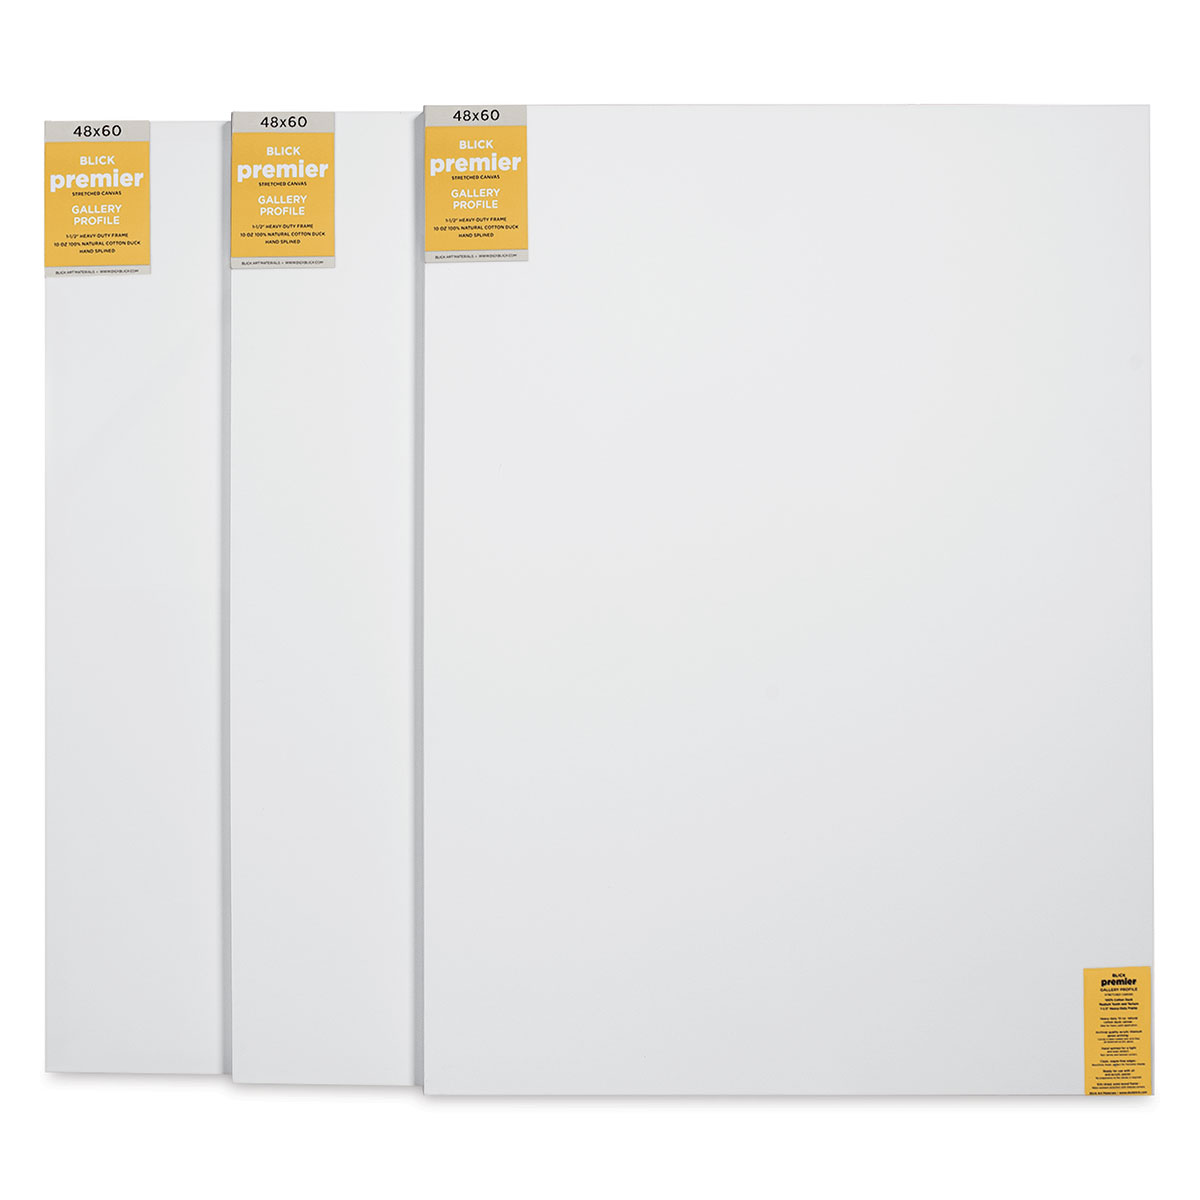 Milo Stretched Artist Canvas | 48x60 Inches | 2 Pack | 1.5” inch Thick Gallery Profile | 15 oz Primed Large Canvases for Painting, Ready to Paint